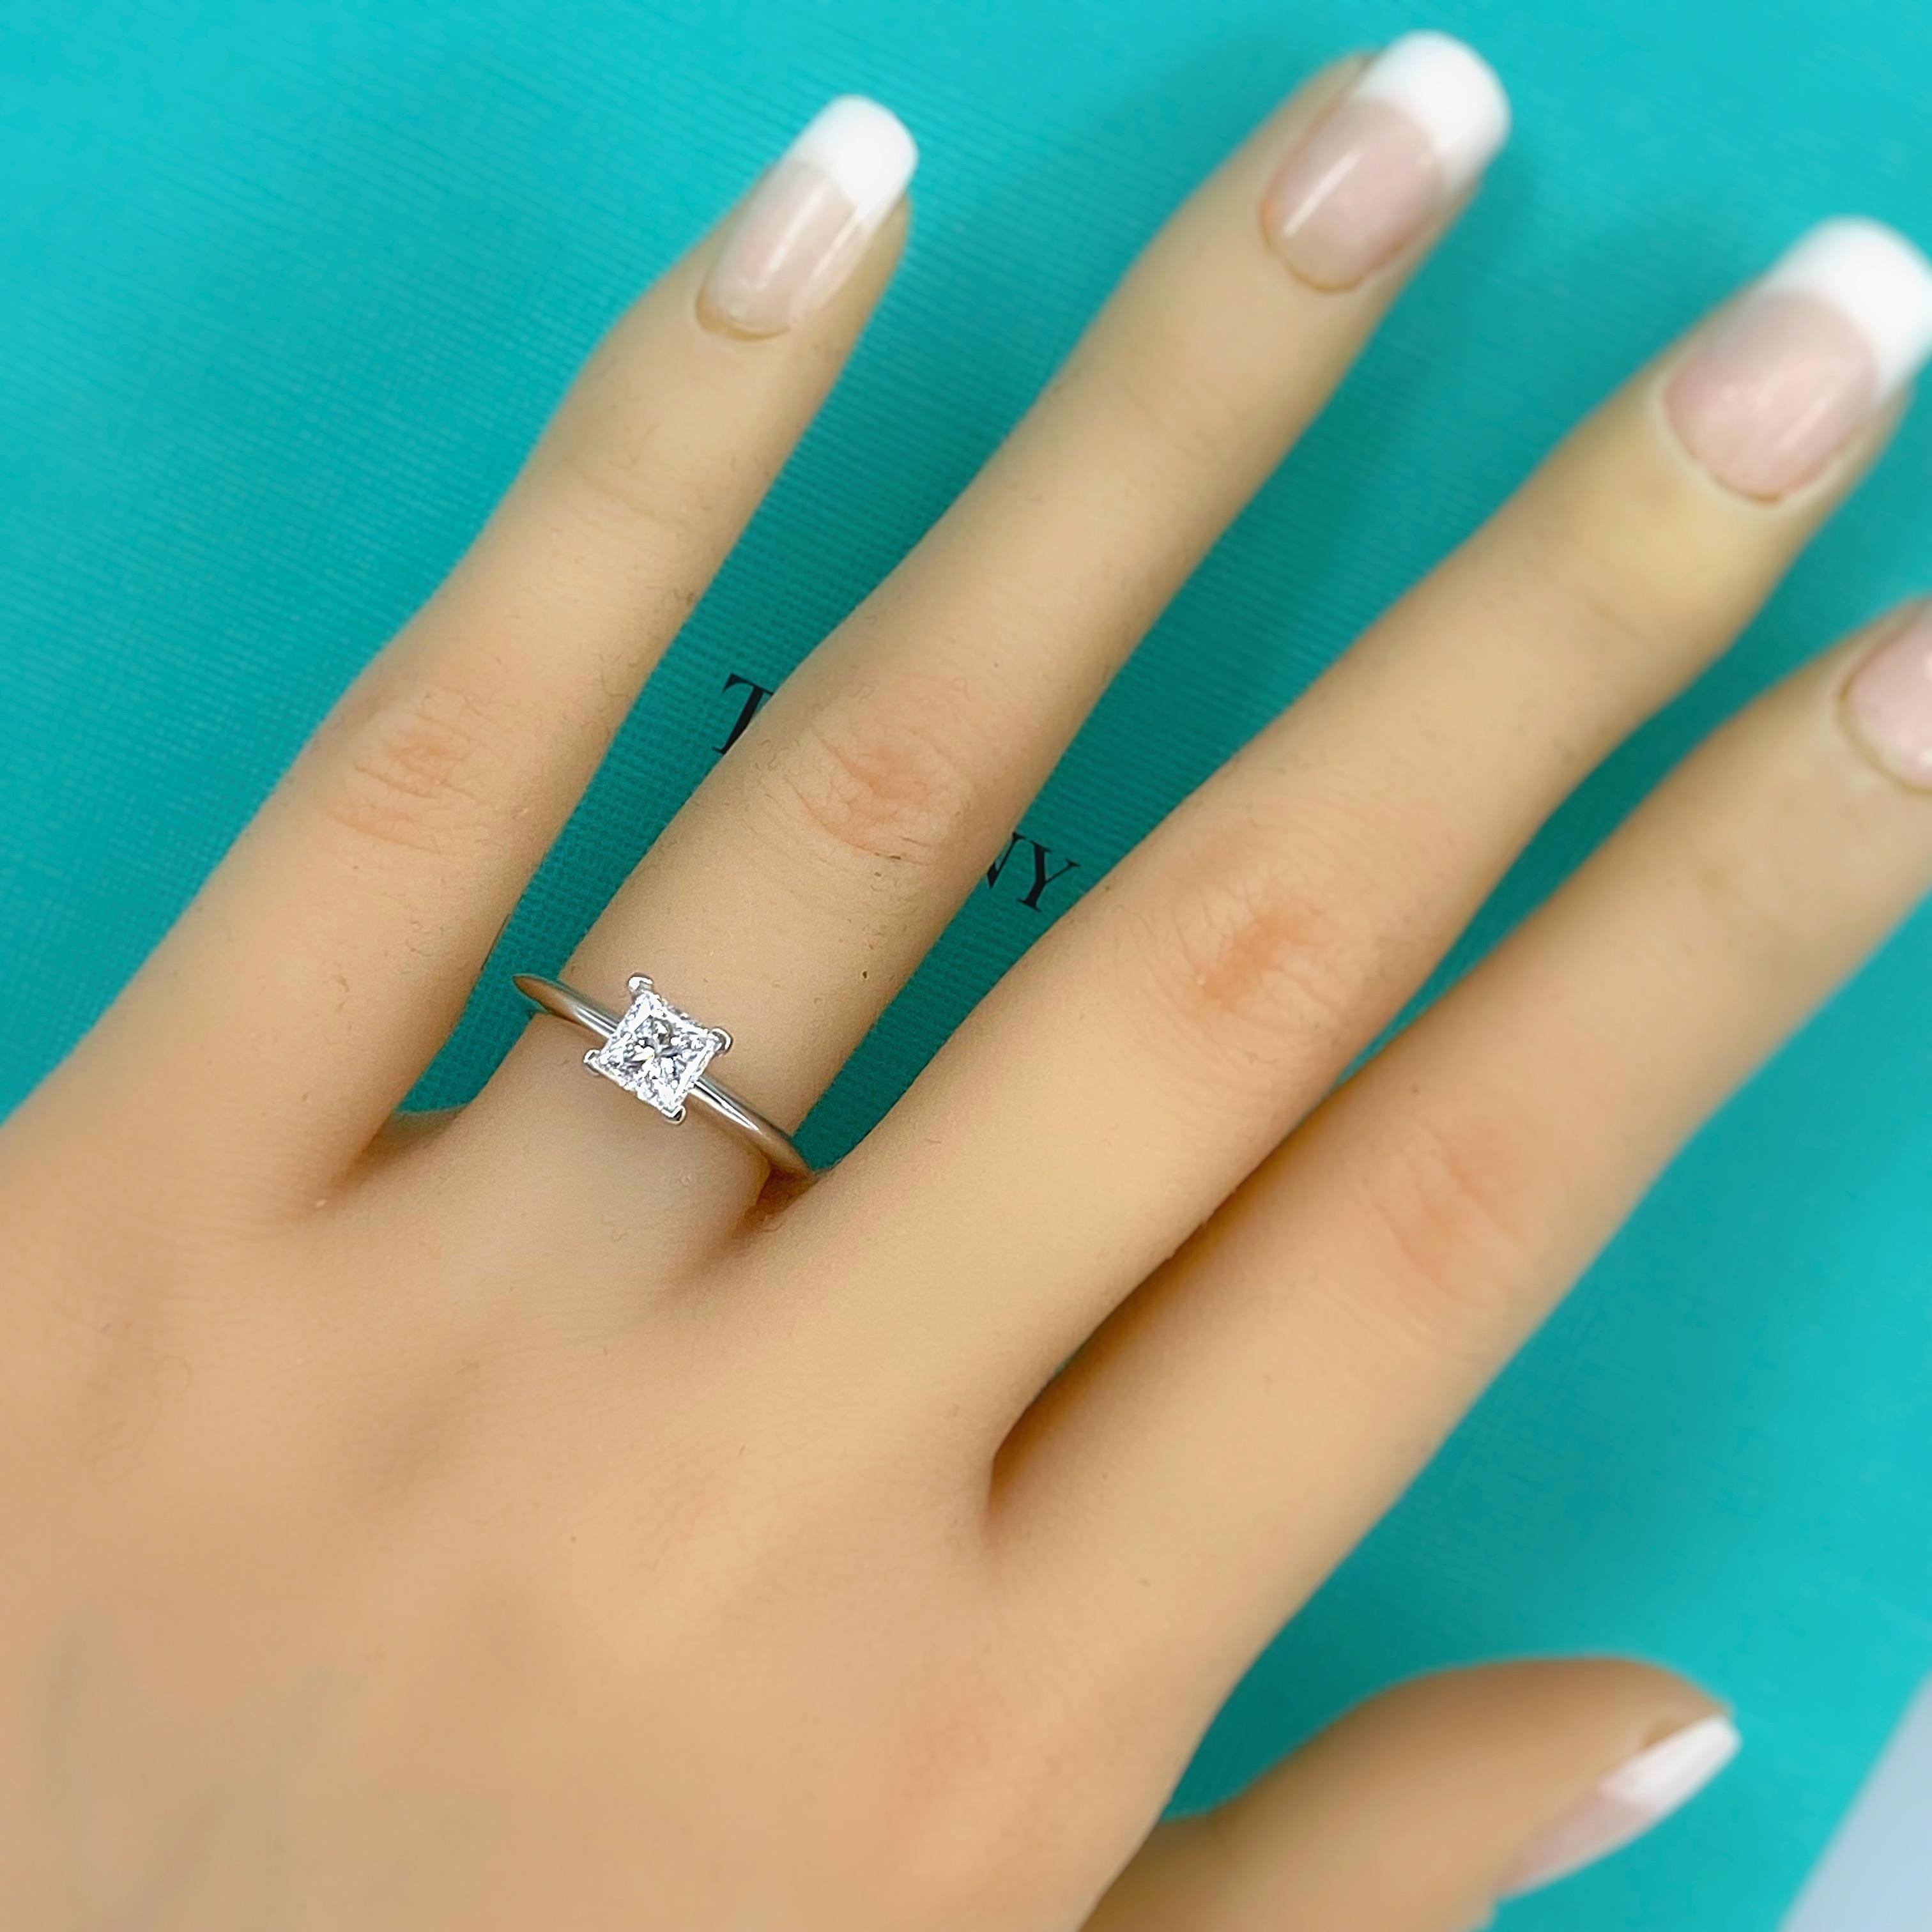 Tiffany & Co. Classic Princess Cut Diamond Solitaire Engagement Ring
Style:  Solitaire 4-Prong
Diamond Registration #:  22956515/I04190390
Metal:  Platinum PT950
Size:  6 sizable 
TCW:  0.73 cts
Main Diamond:  Princess Cut Diamonds 0.73 cts 
Color &